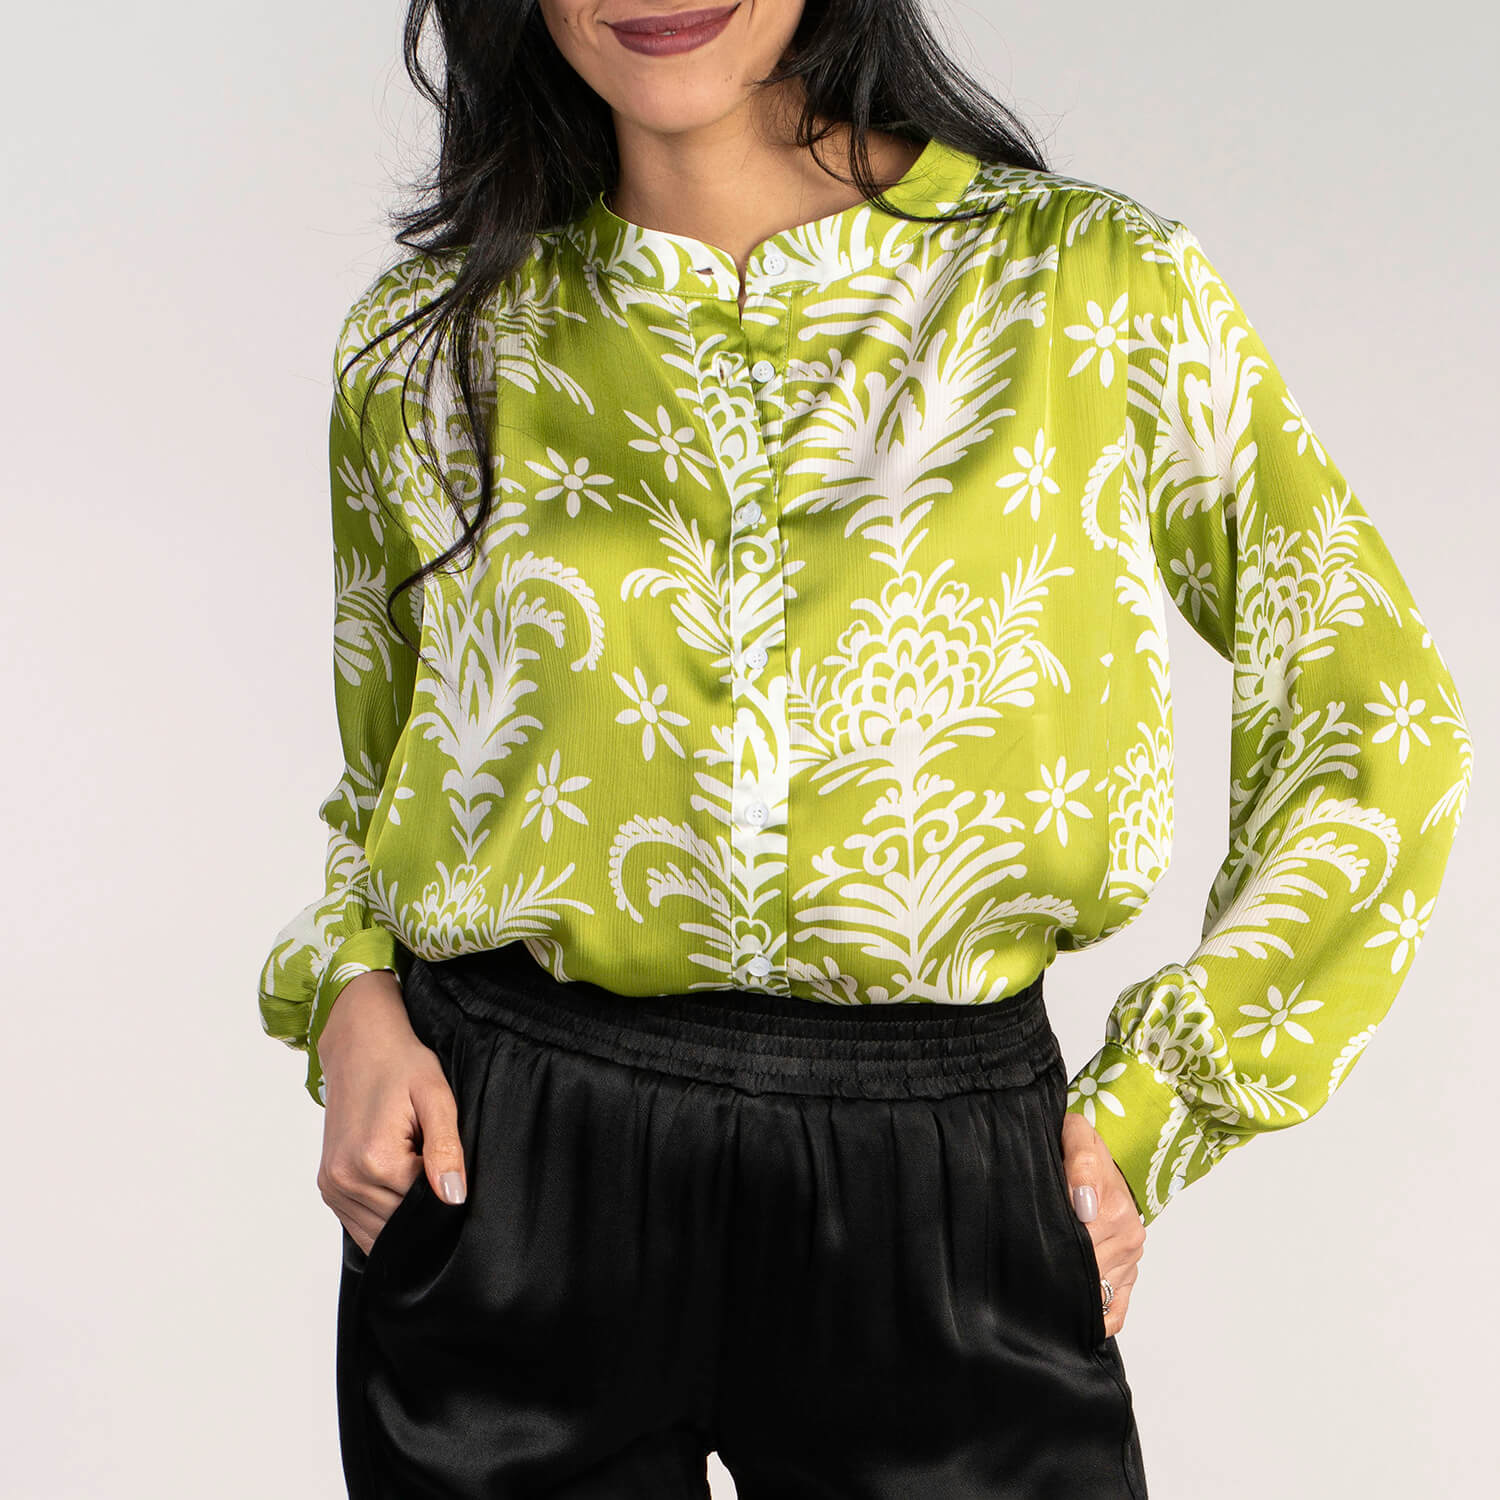 Naoise Print Crepe Blouse - Lime 1 Shaws Department Stores